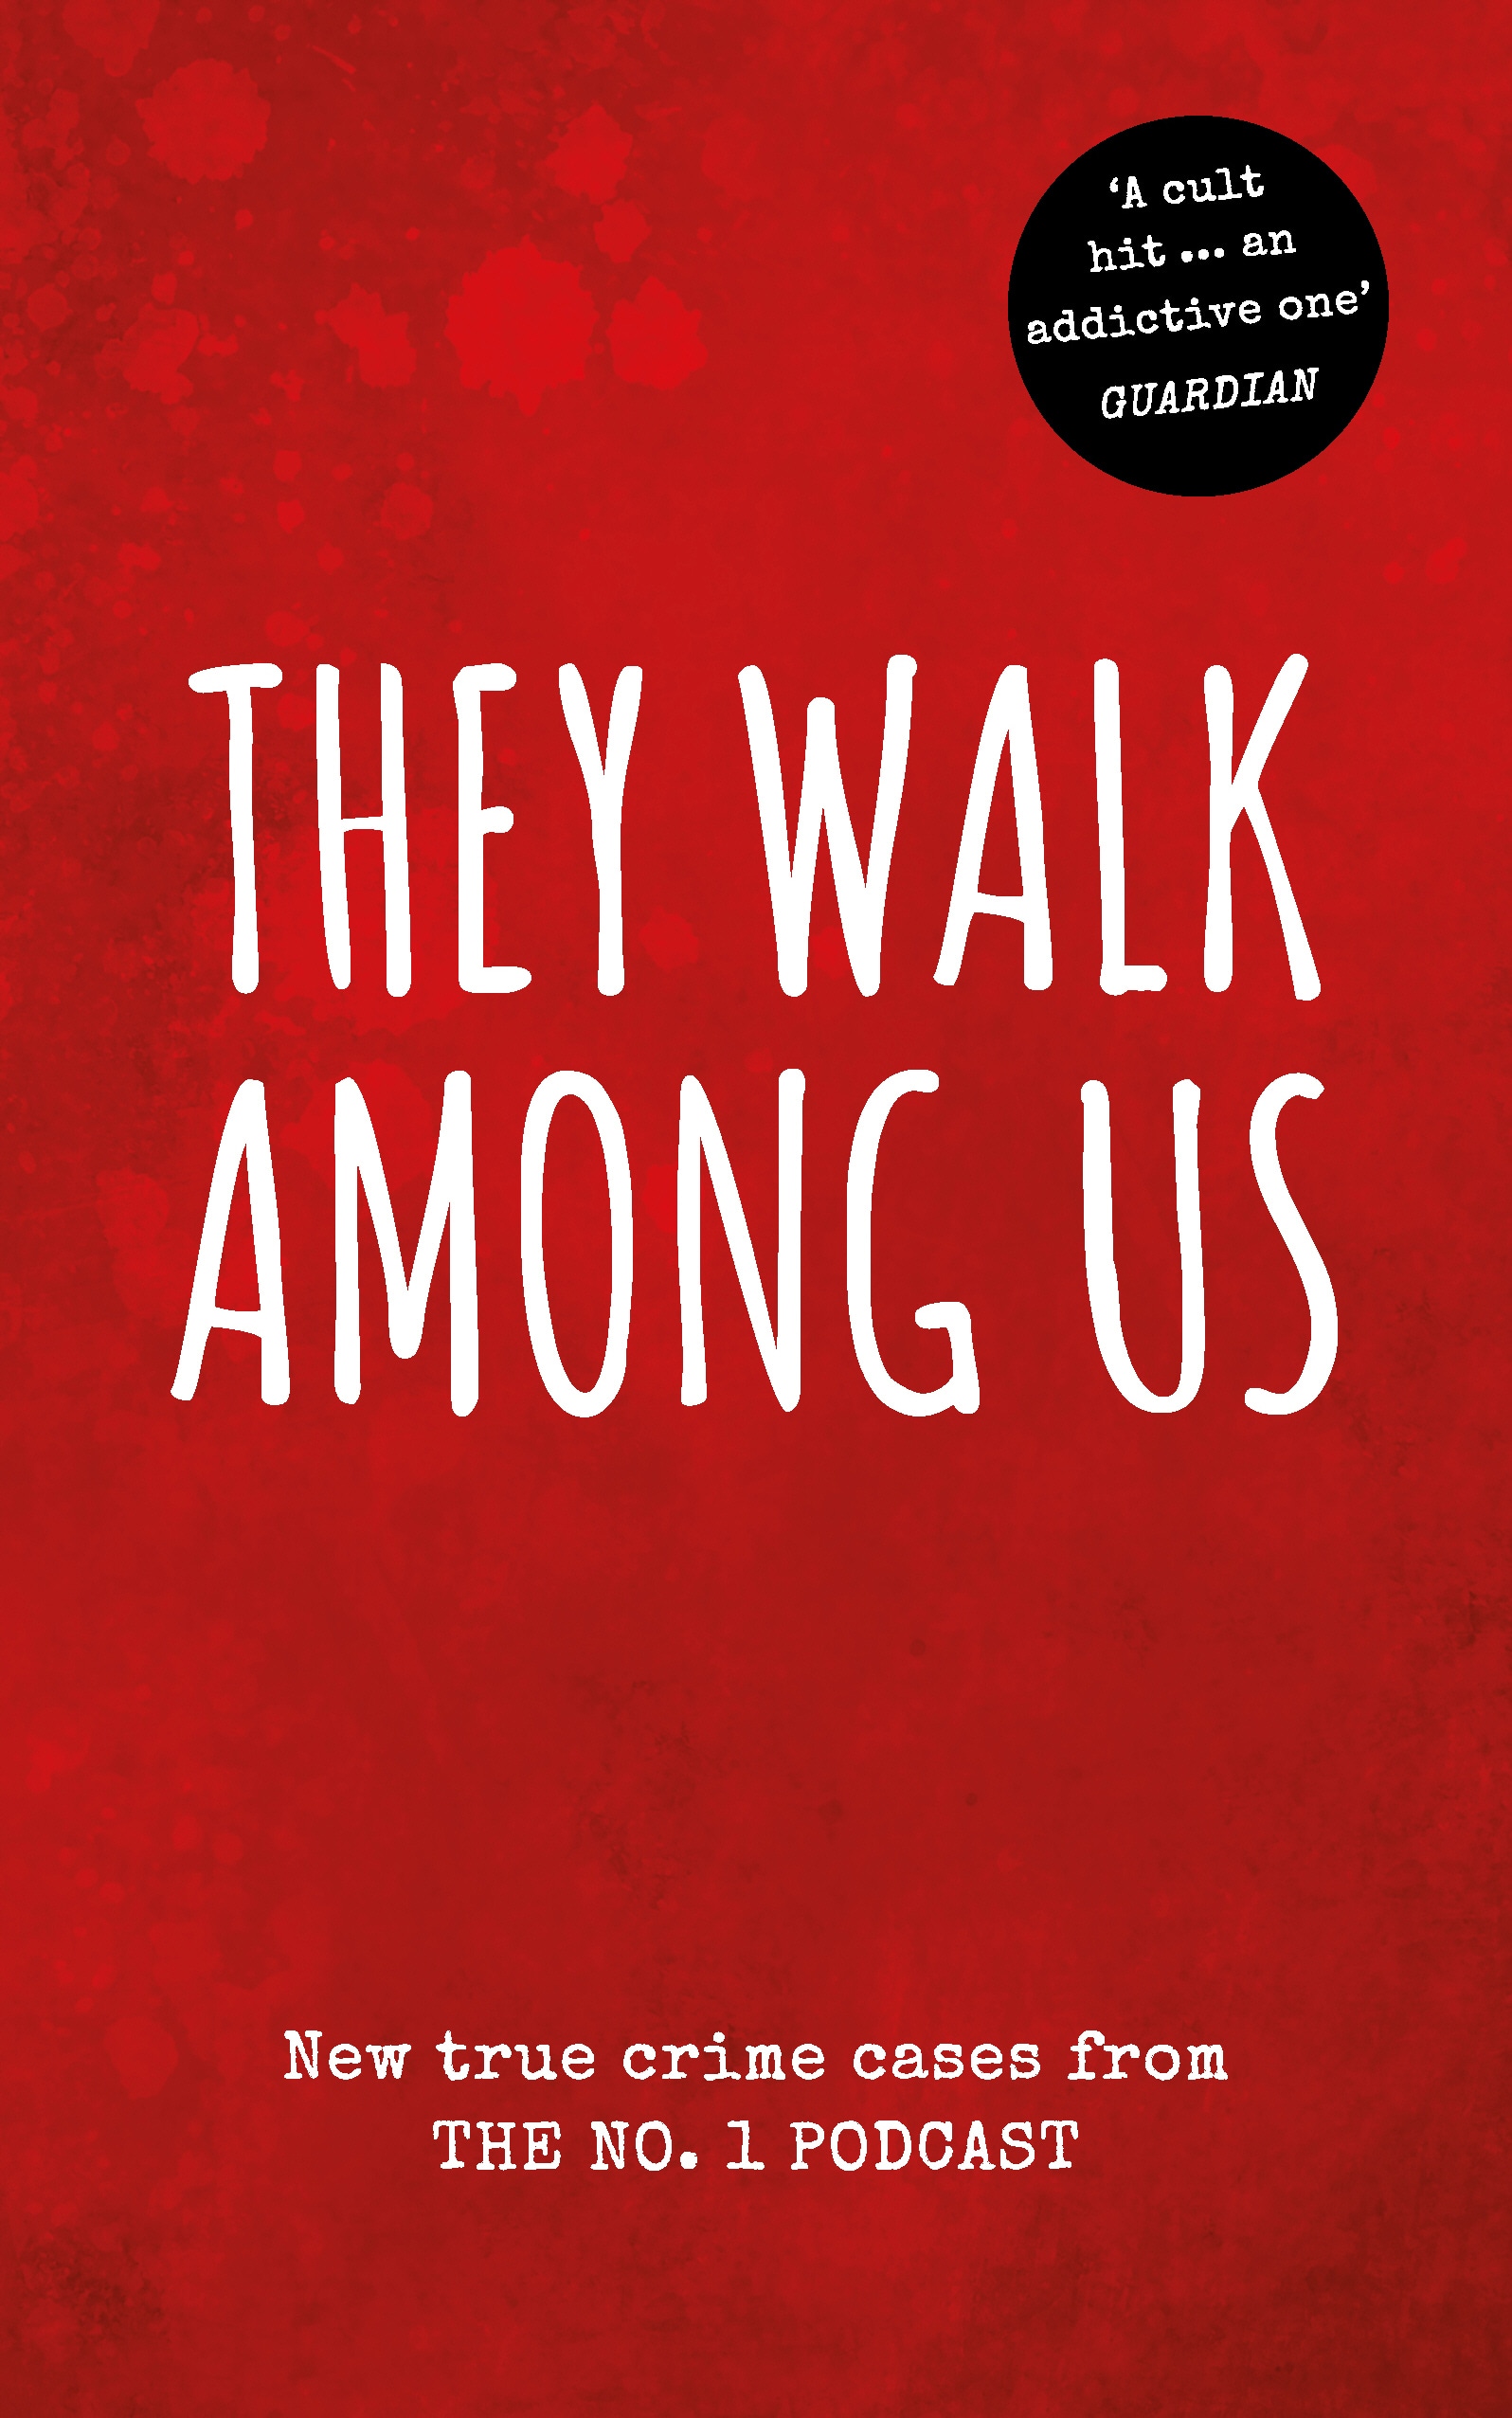 Book “They Walk Among Us” by Benjamin Fitton, Rosanna Fitton — May 30, 2019